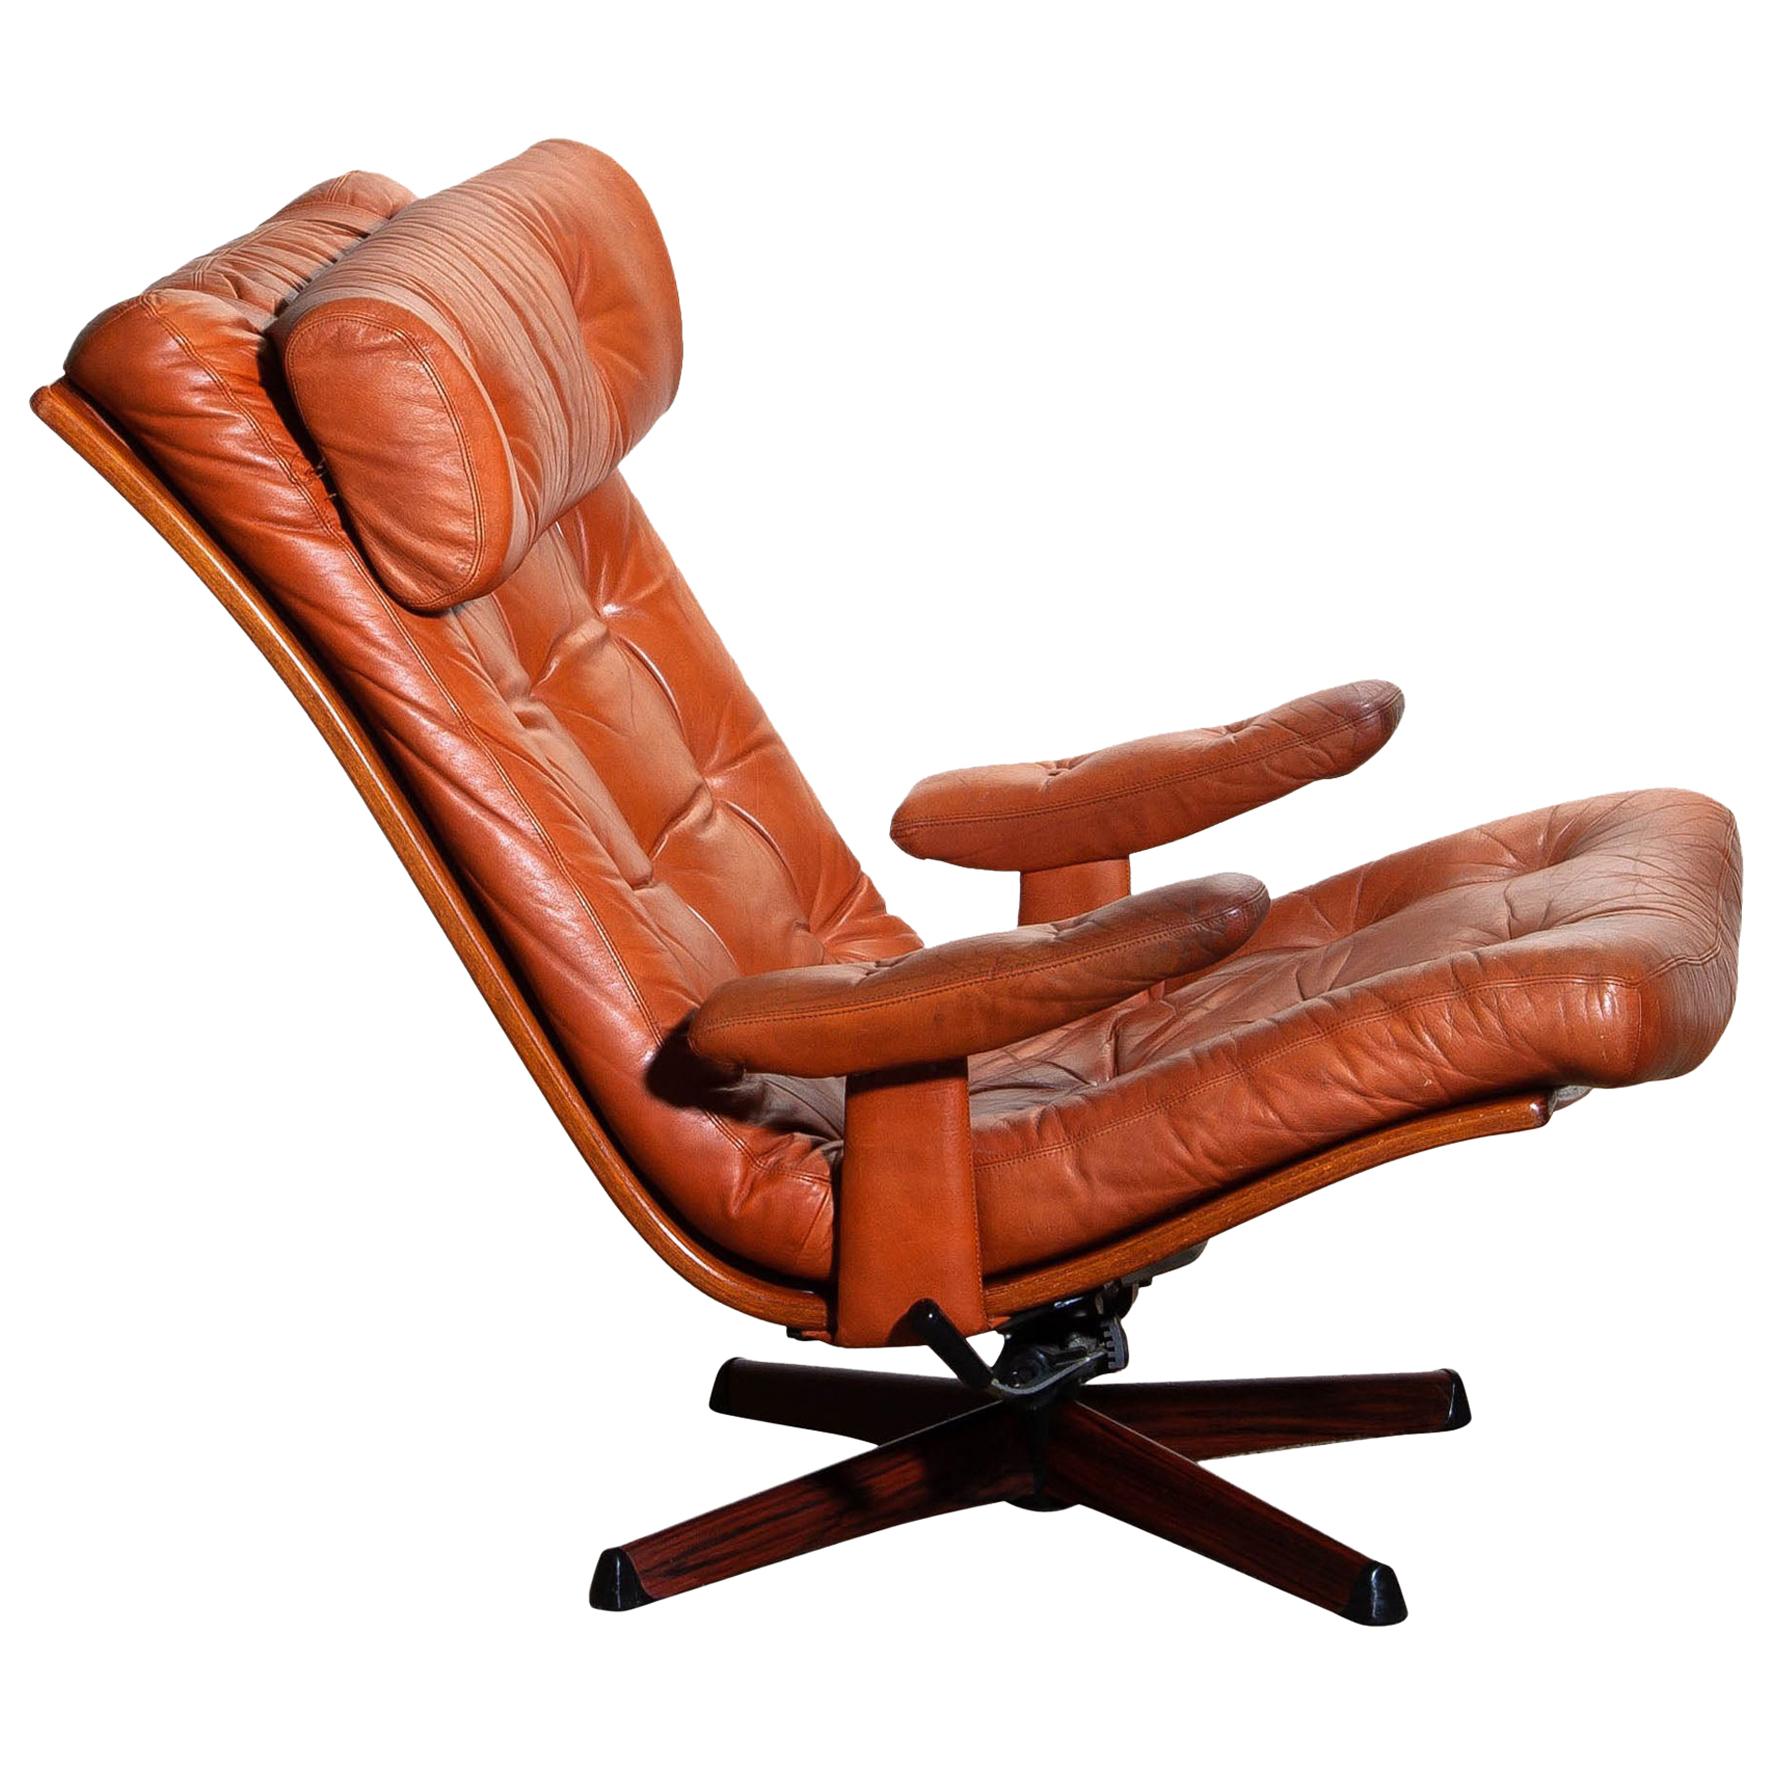 1960s, 1 Cognac Leather Swivel or Relax Lounge Easy Chair by Göte Design Nässjö